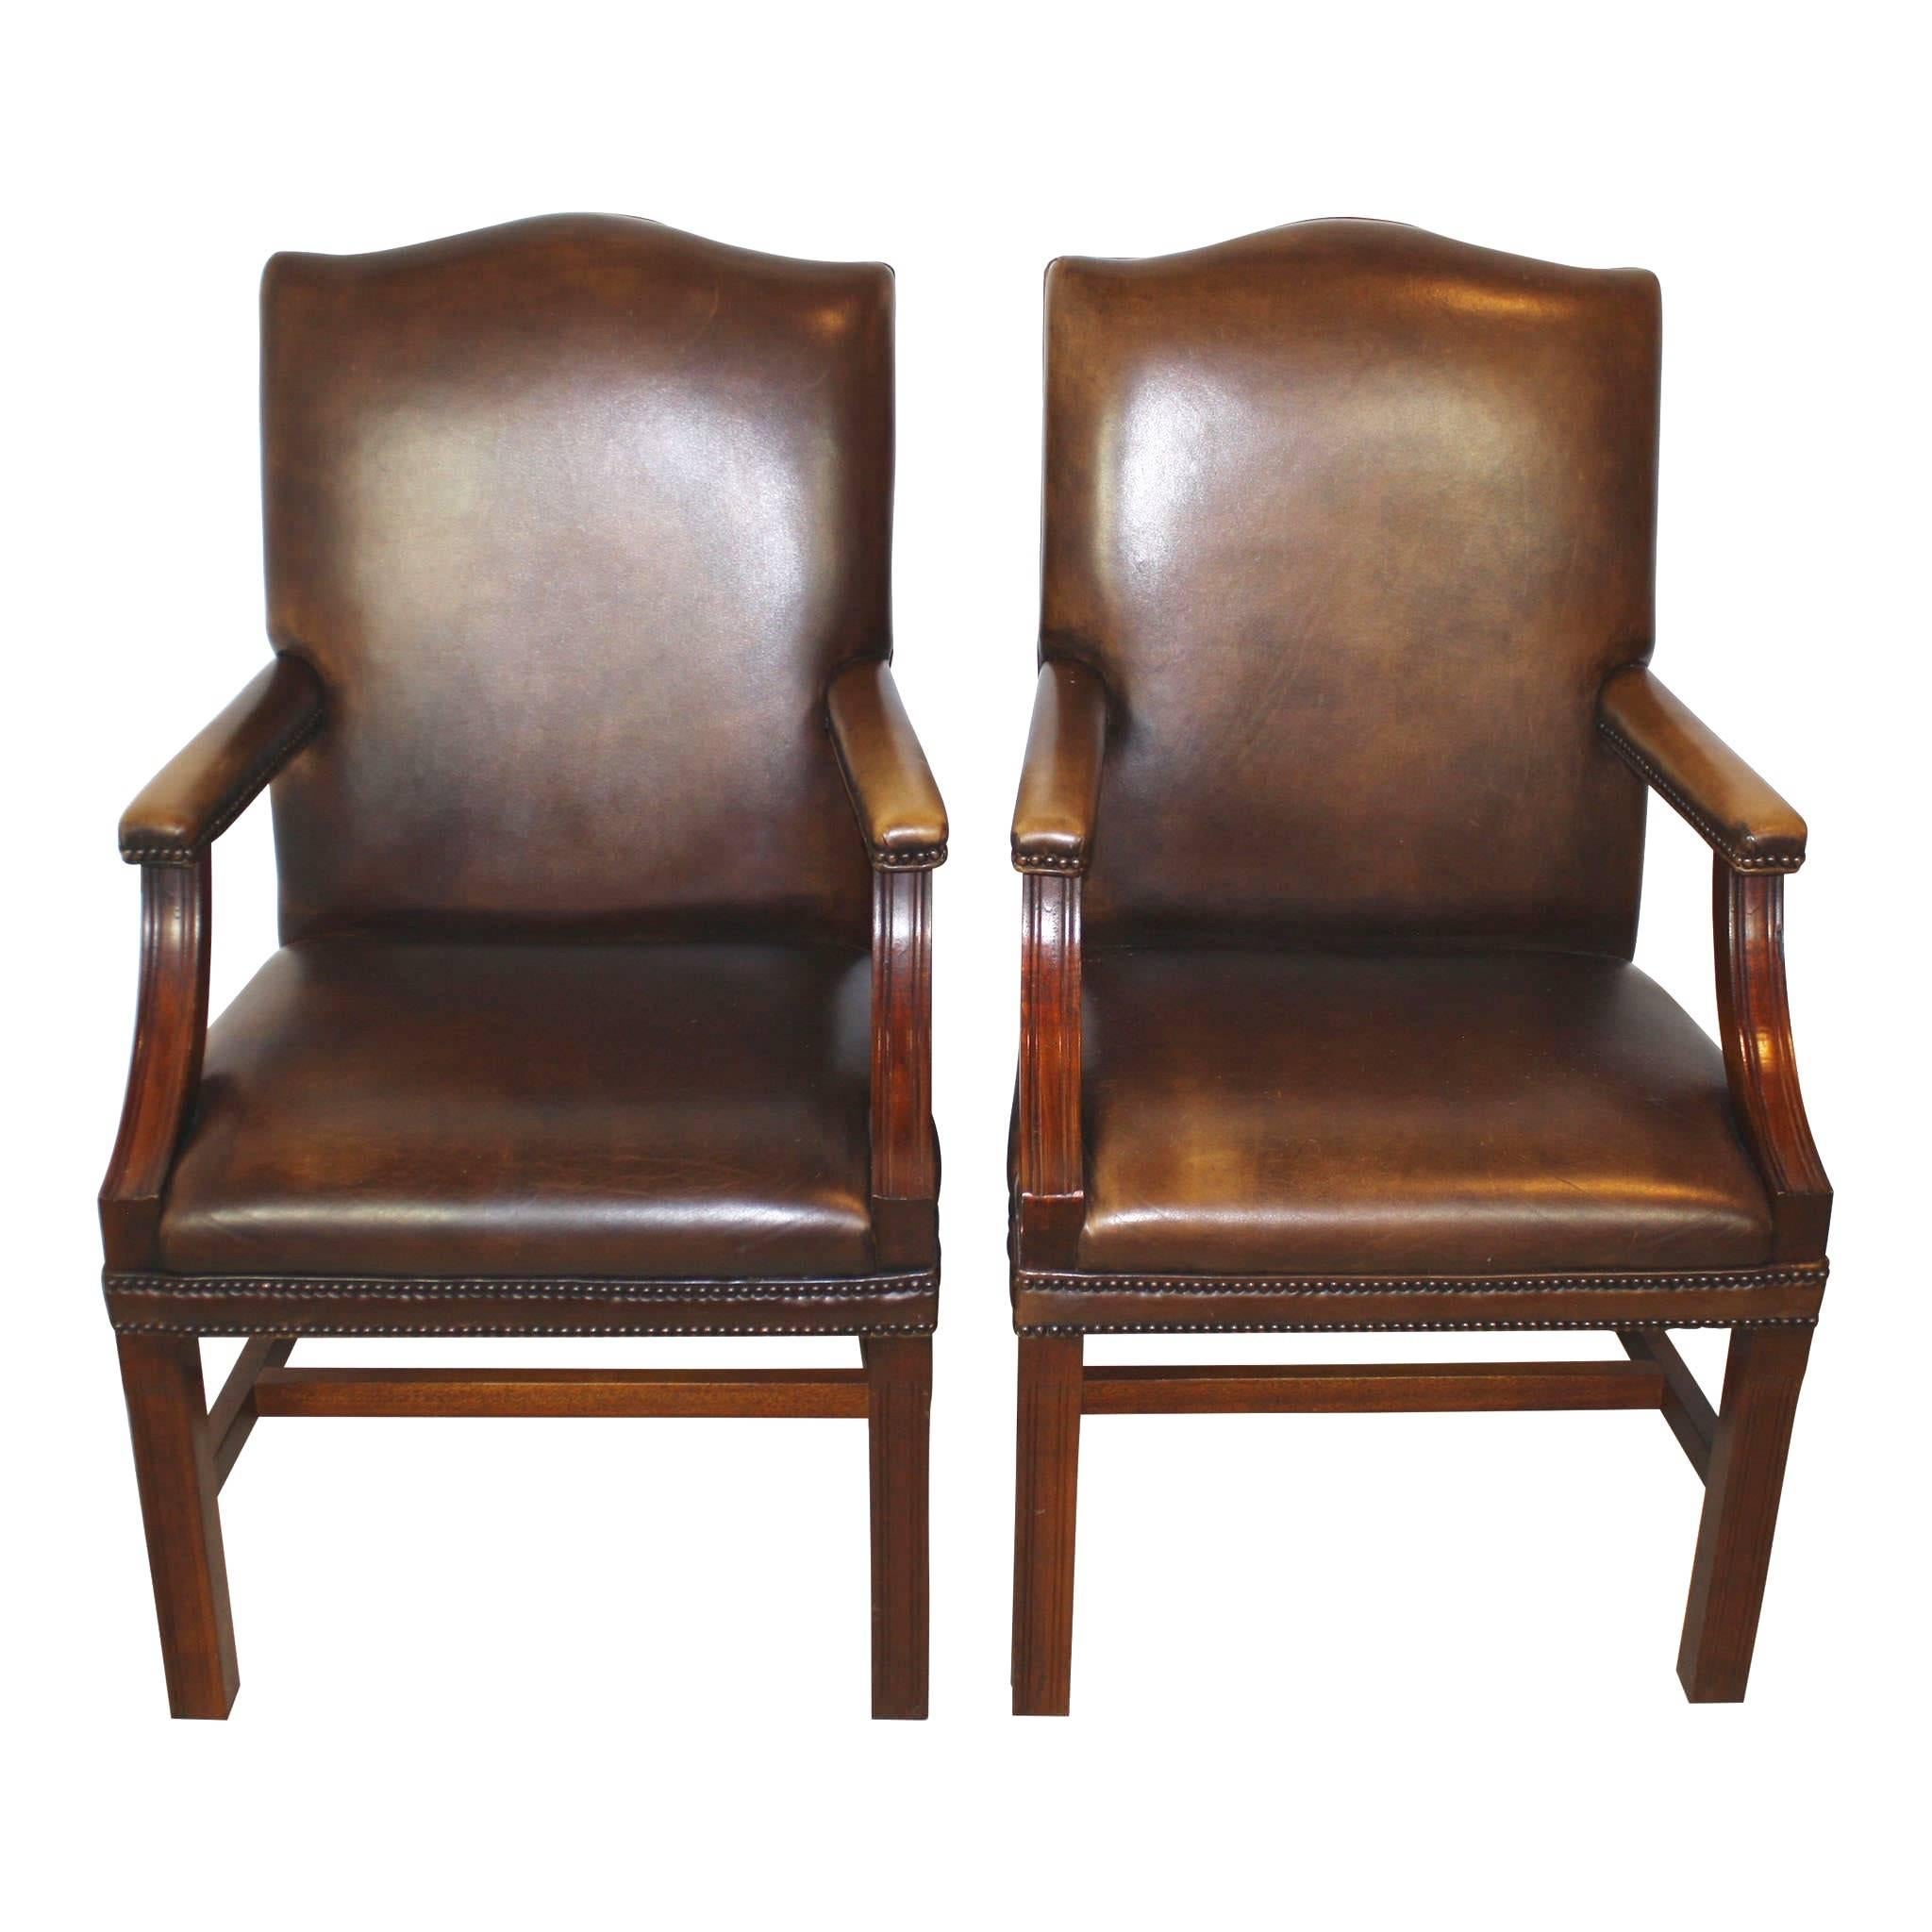 Early 20th Century English Arched Back Leather Armchairs